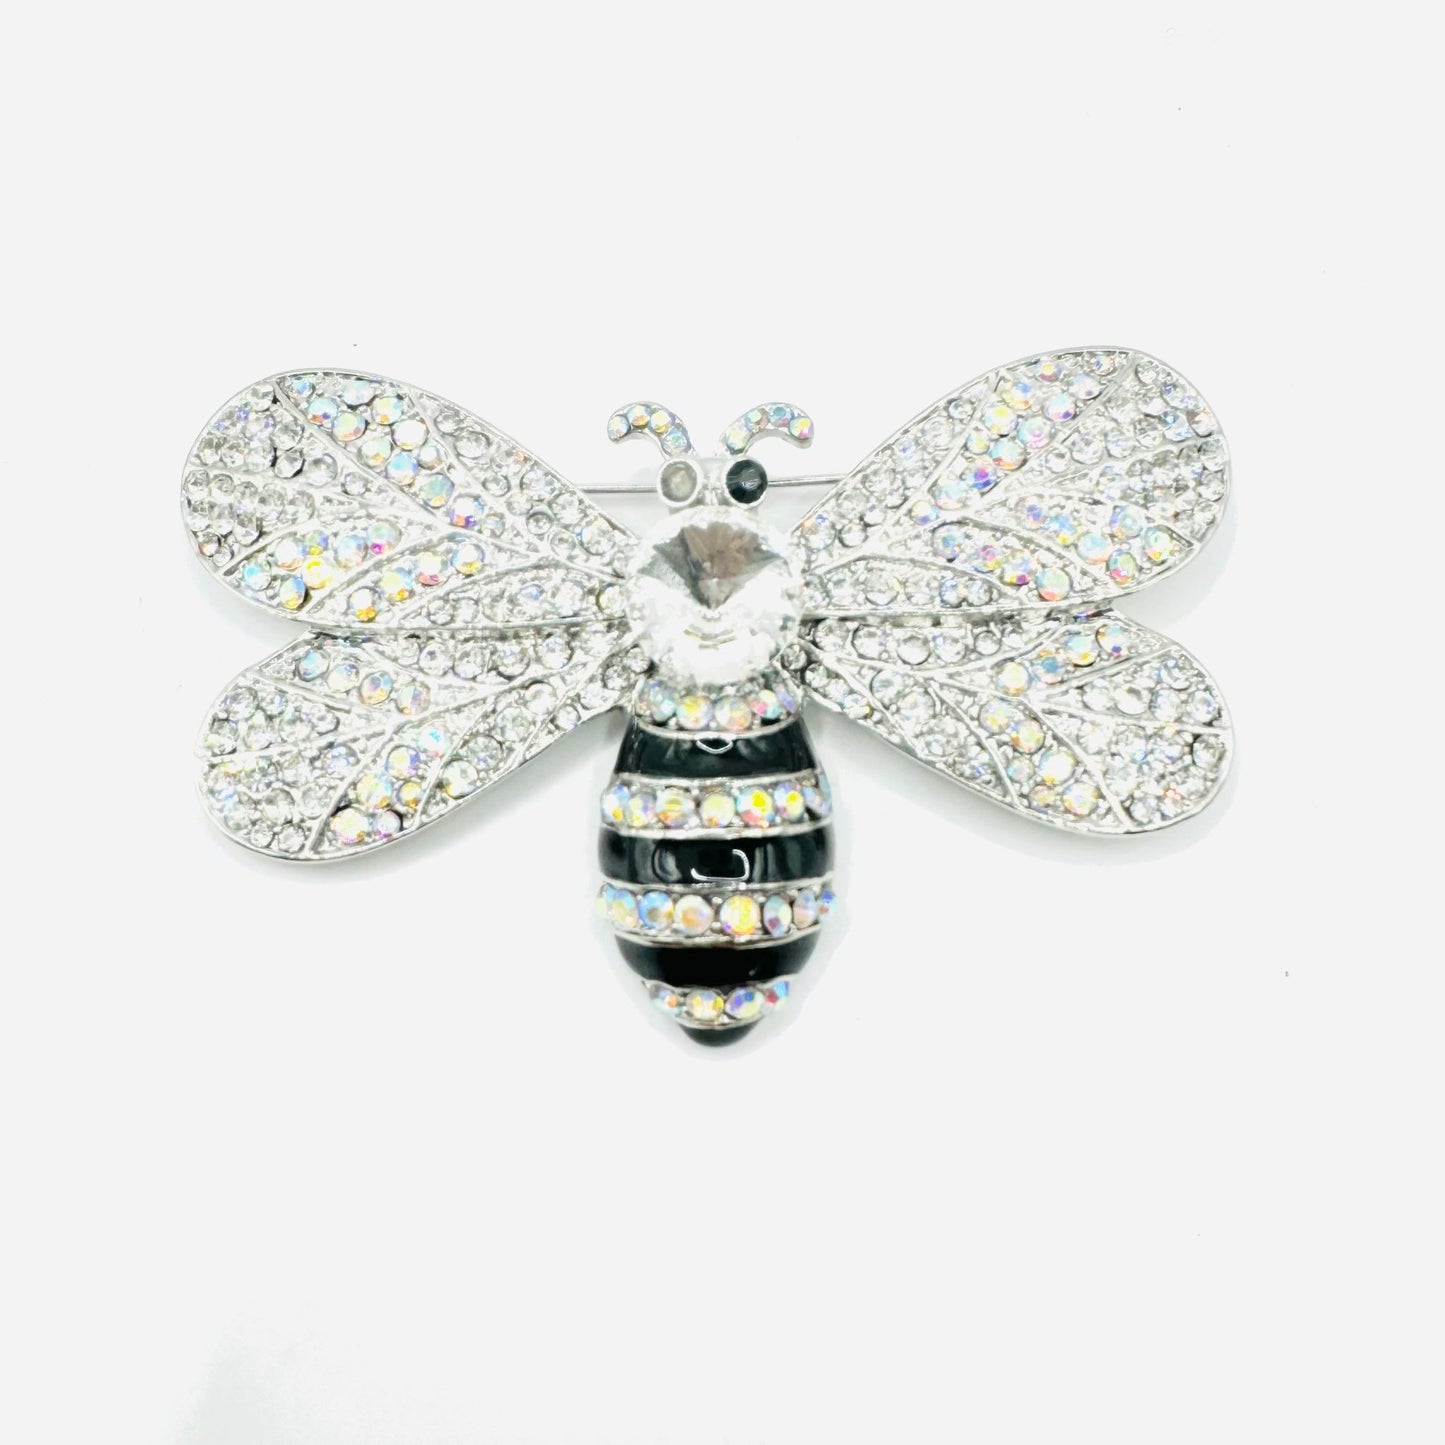 Butterfly & Bumble Bee Brooch Pins - House of FaSHUN by Shun Melson